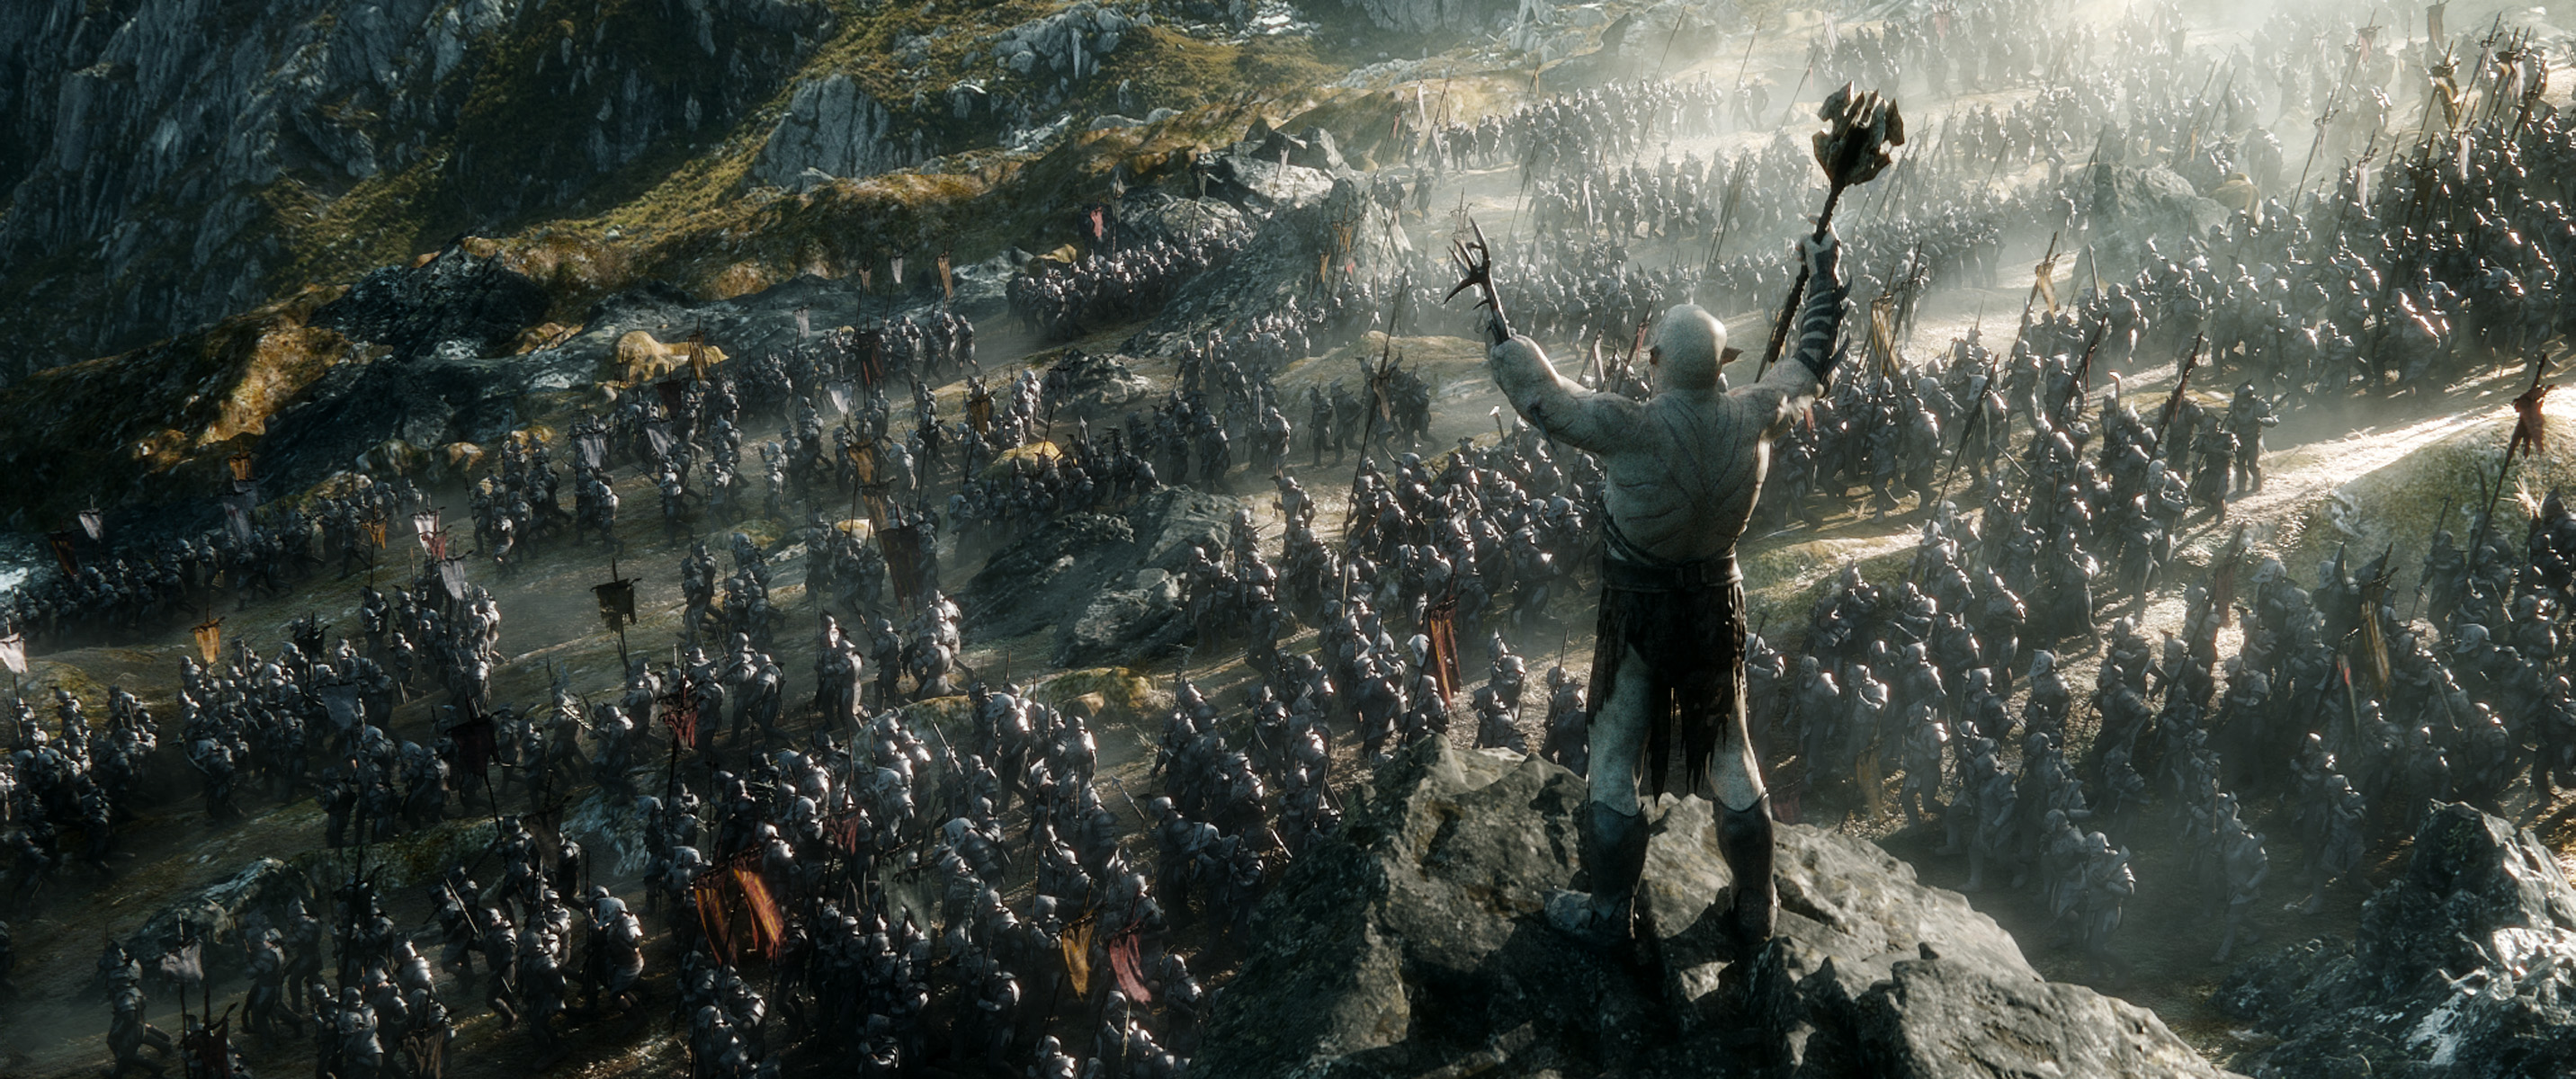 movie, the hobbit: the battle of the five armies, the lord of the rings